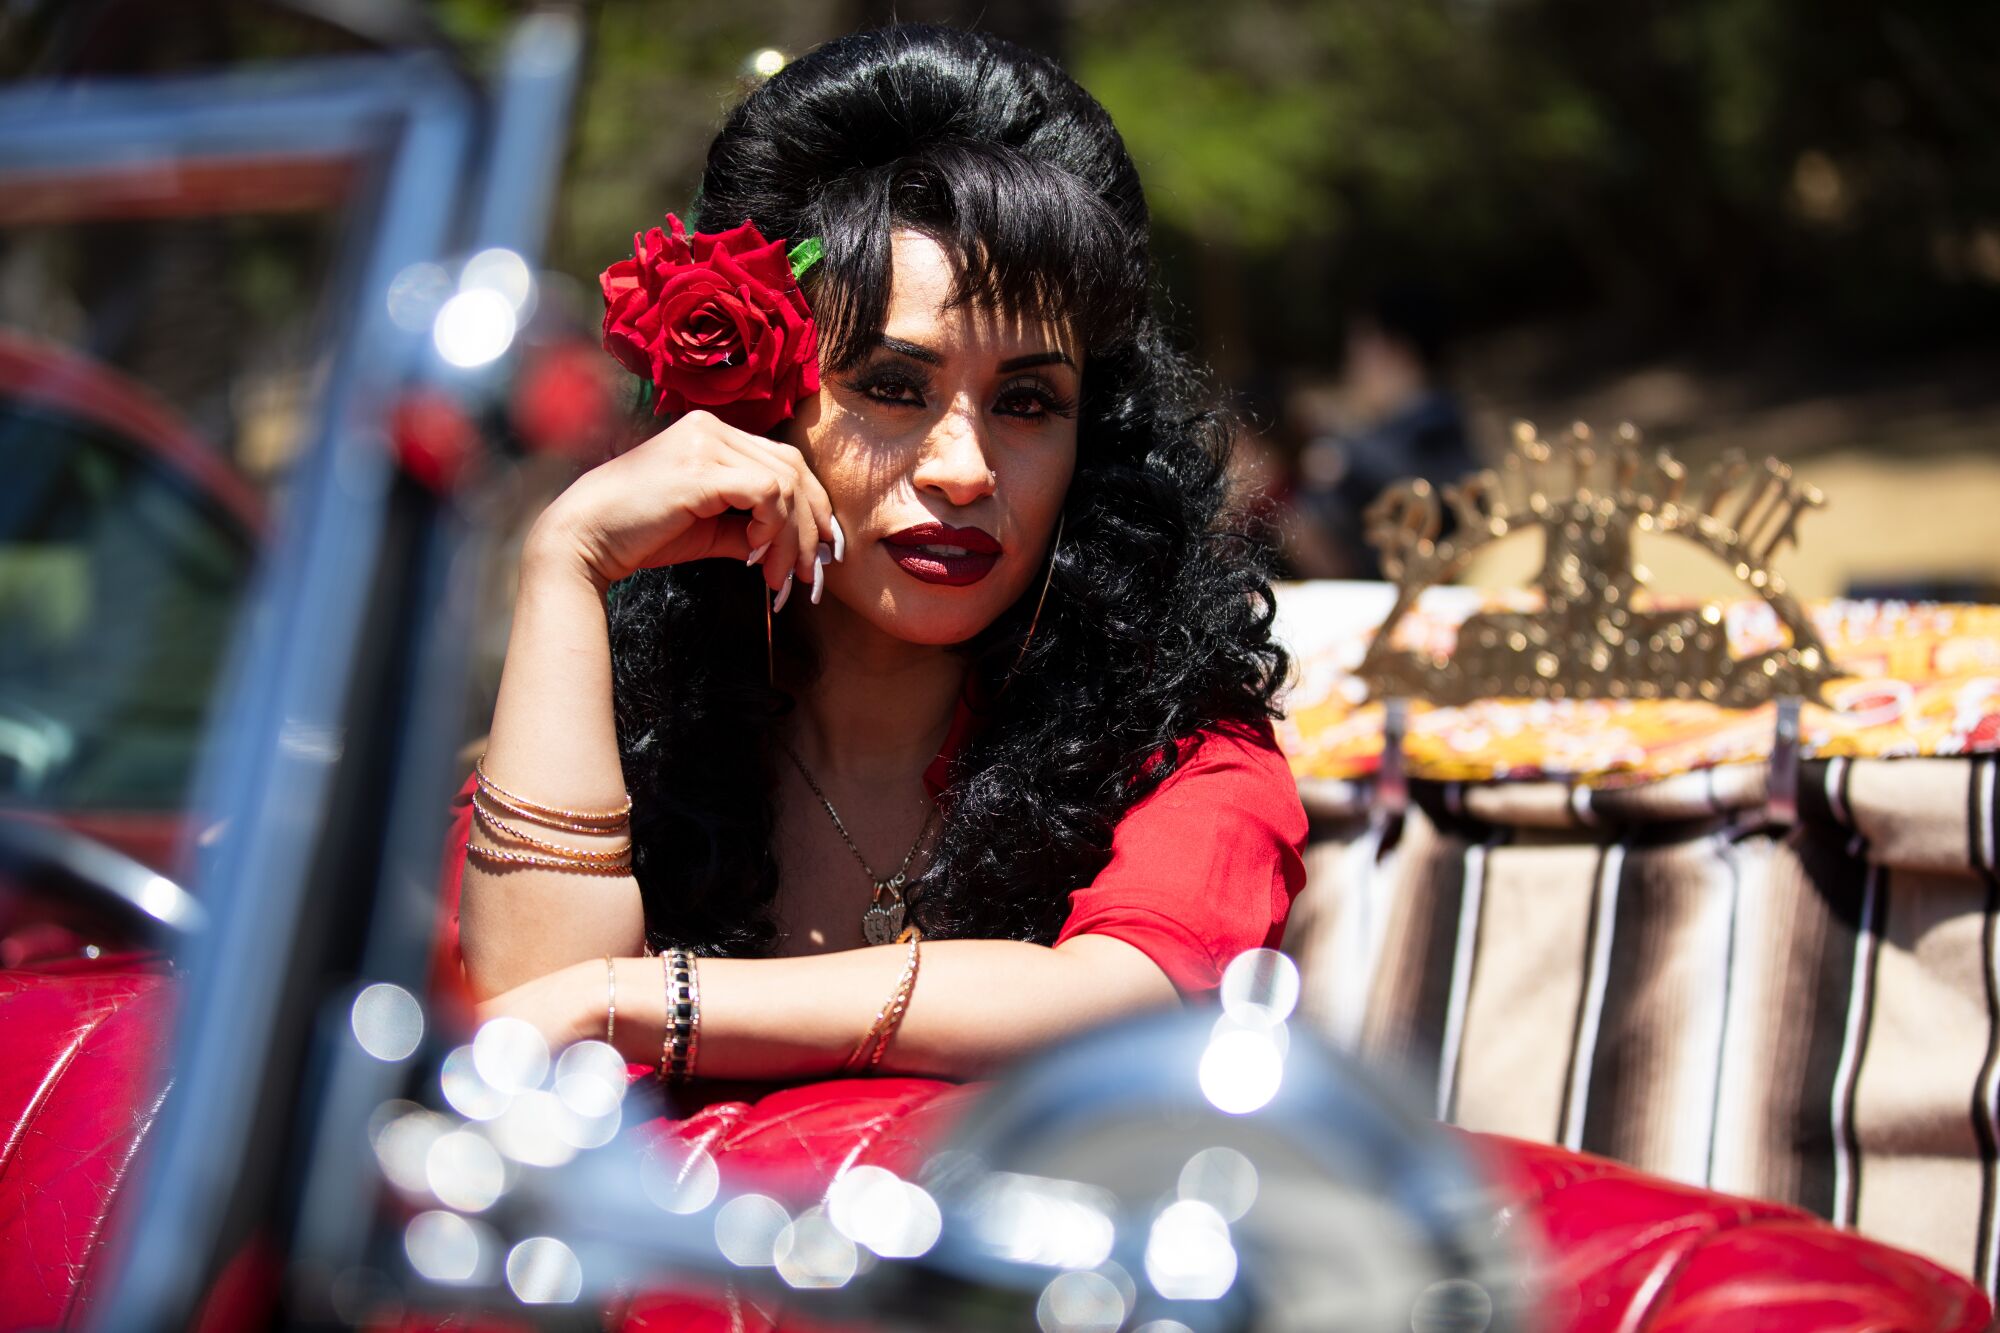 A woman with a bright red flower in her dark hair leans an elbow on a car's red leather seat.